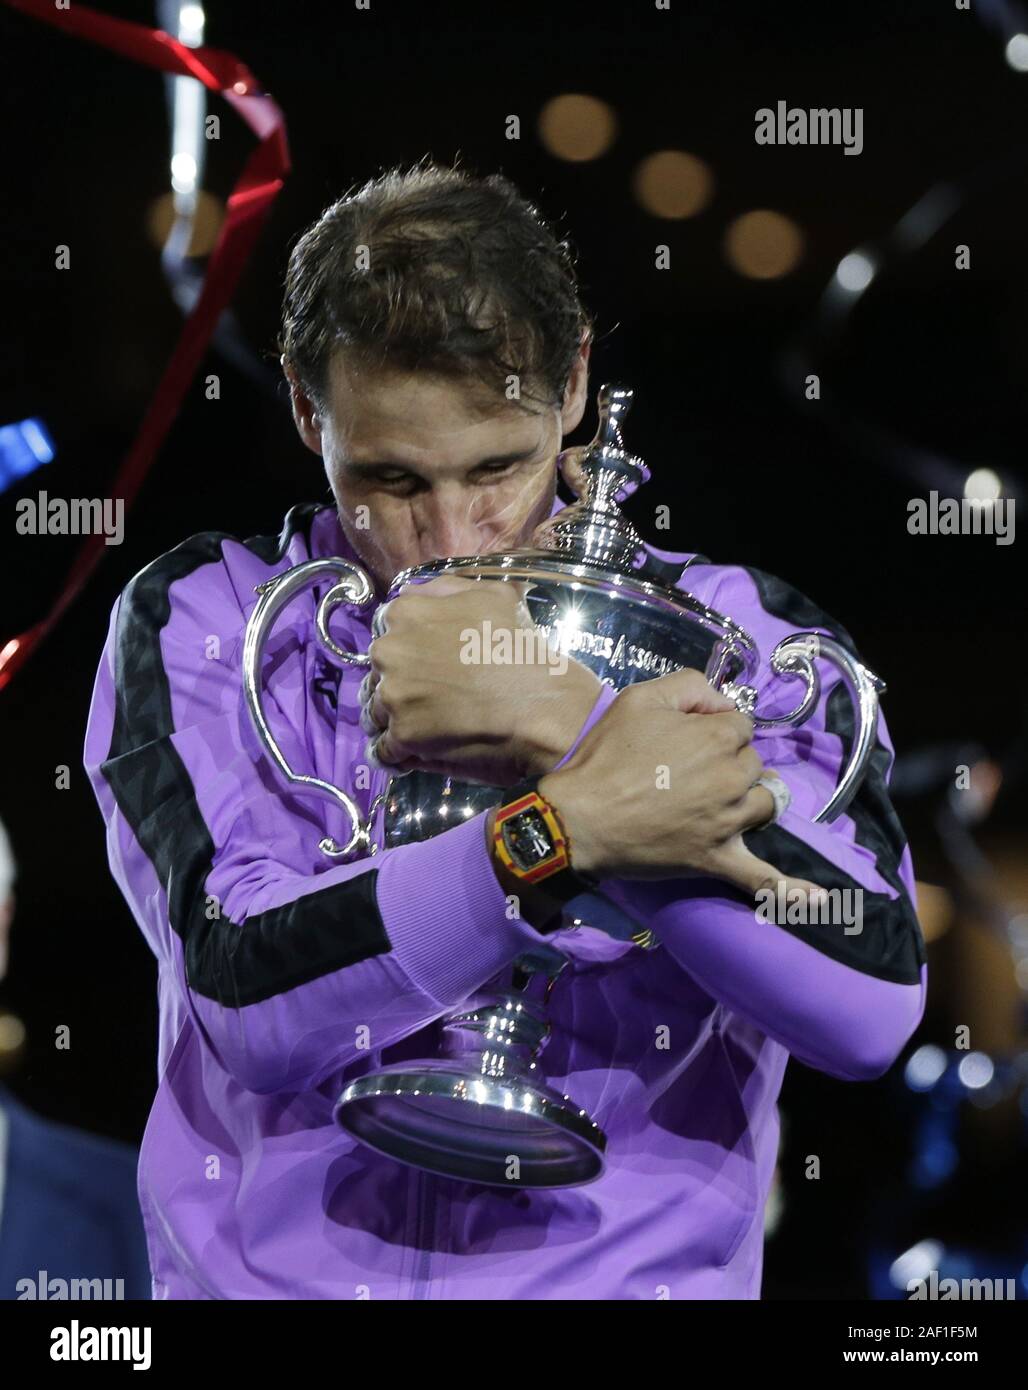 Flushing Meadow, United States. 12th Dec, 2019. Rafael Nadal of Spain hugs the championship trophy after defeating Daniil Medvedev of Russia in 5 sets to win the Men's Final in Arthur Ashe Stadium at the 2019 US Open Tennis Championships at the USTA Billie Jean King National Tennis Center on Sunday, September 8, 2019, in New York City. Nadal defeated Medvedev 7-5, 6-3, 5-7, 4-6, 6-4 to win his 4th US Open Championship. Photo by John Angelillo/UPI Credit: UPI/Alamy Live News Stock Photo